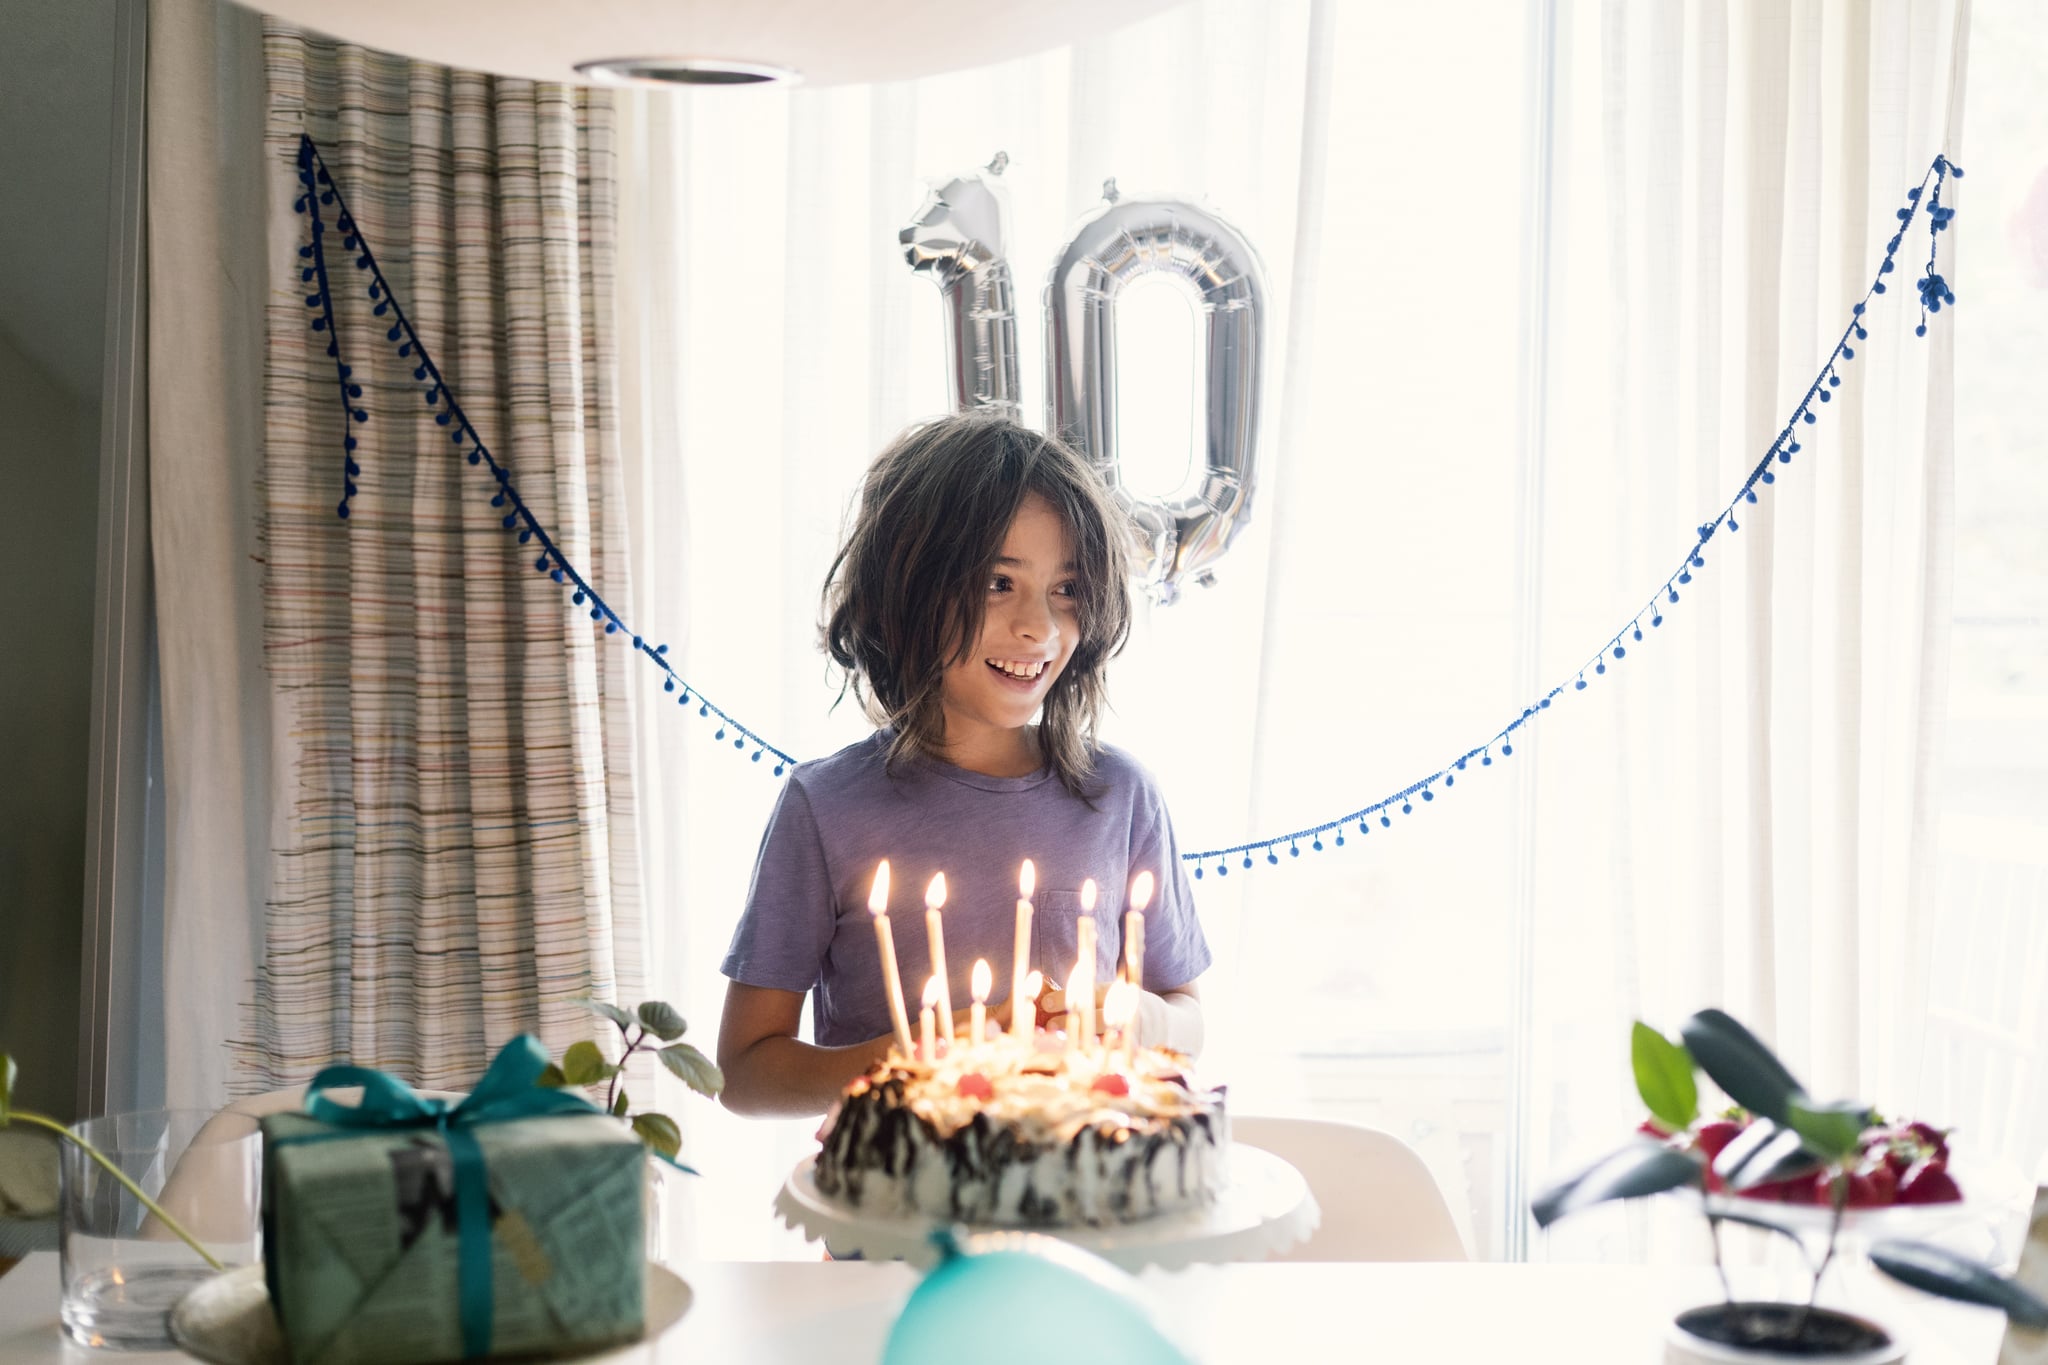 Birthday Party Ideas For Teens and Tweens | POPSUGAR Family